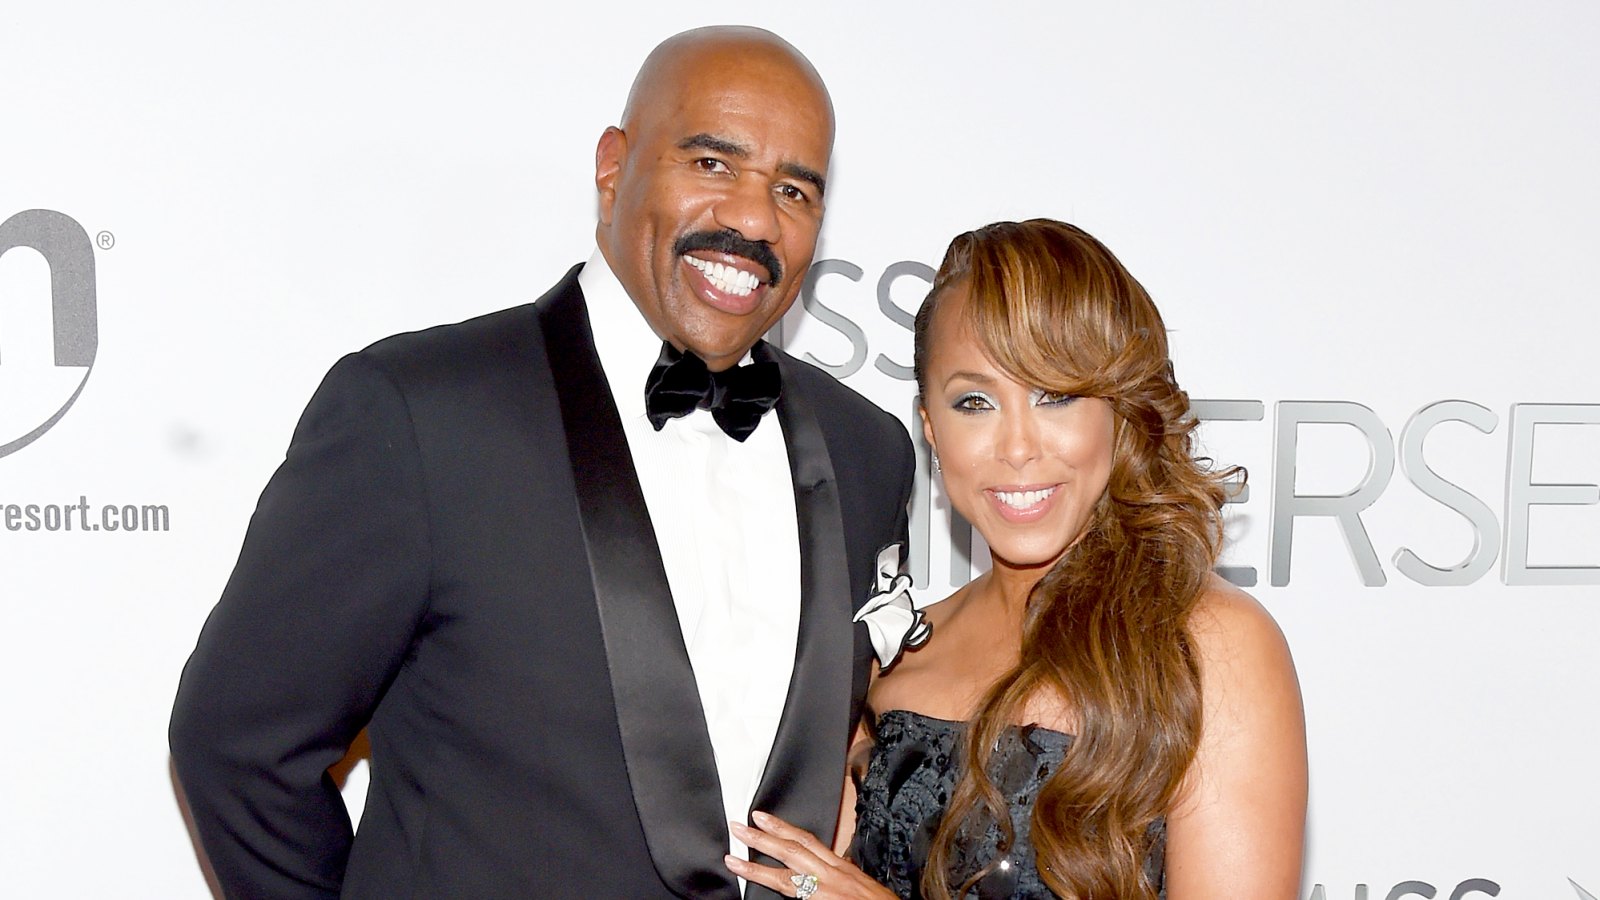 Steve Harvey slams rumors that his wife Marjorie Bridges�cheated�on�him  with their bodyguard and personal chef.